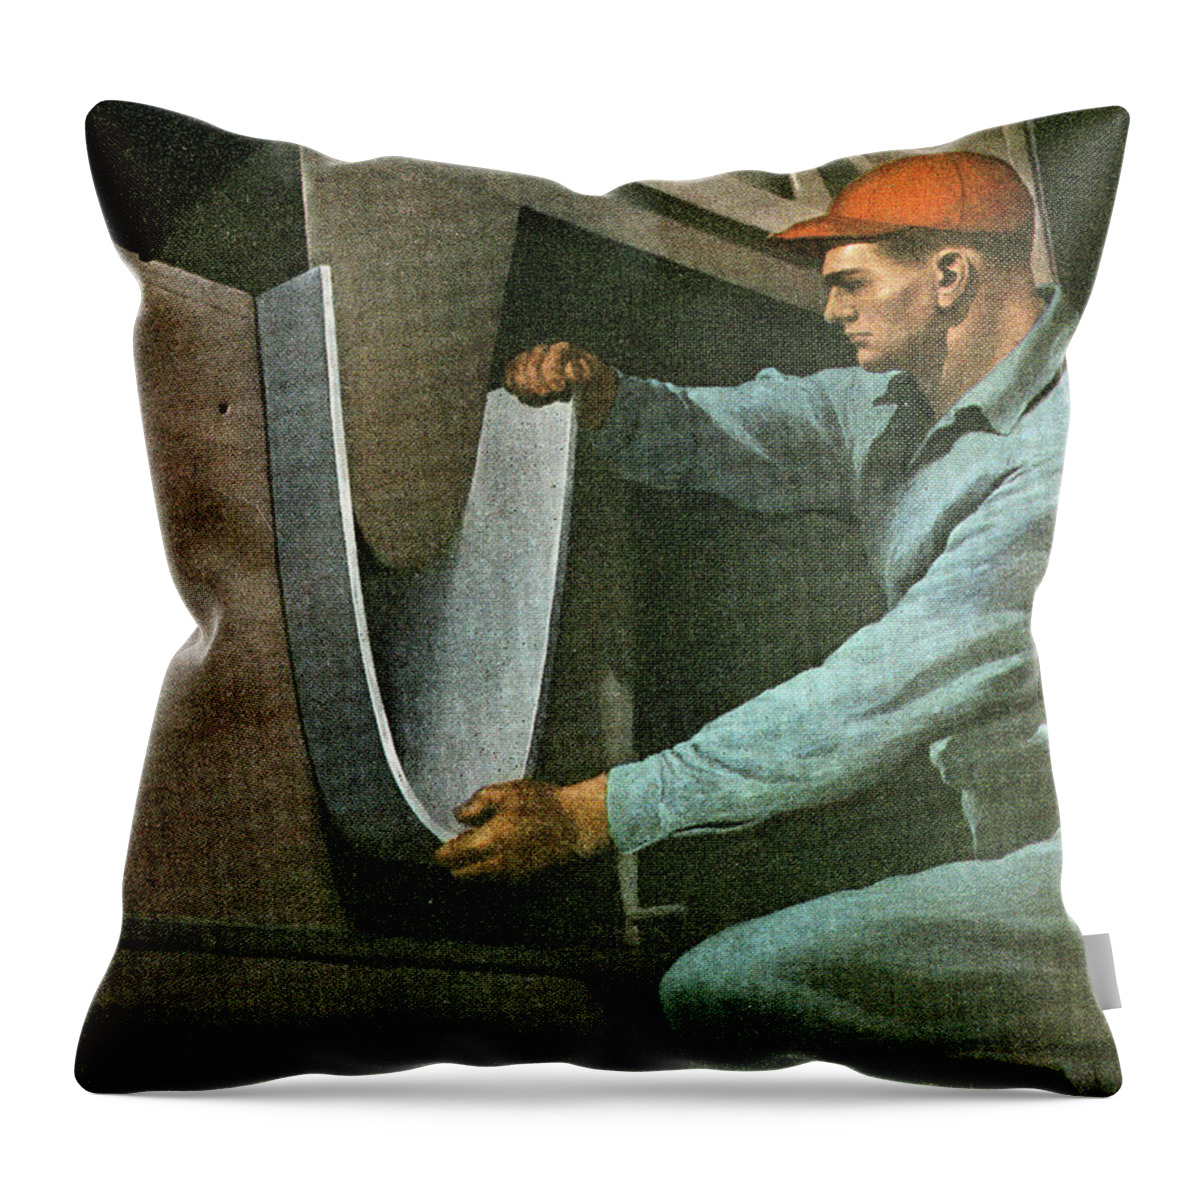 Adult Throw Pillow featuring the drawing Man Working in Factory by CSA Images